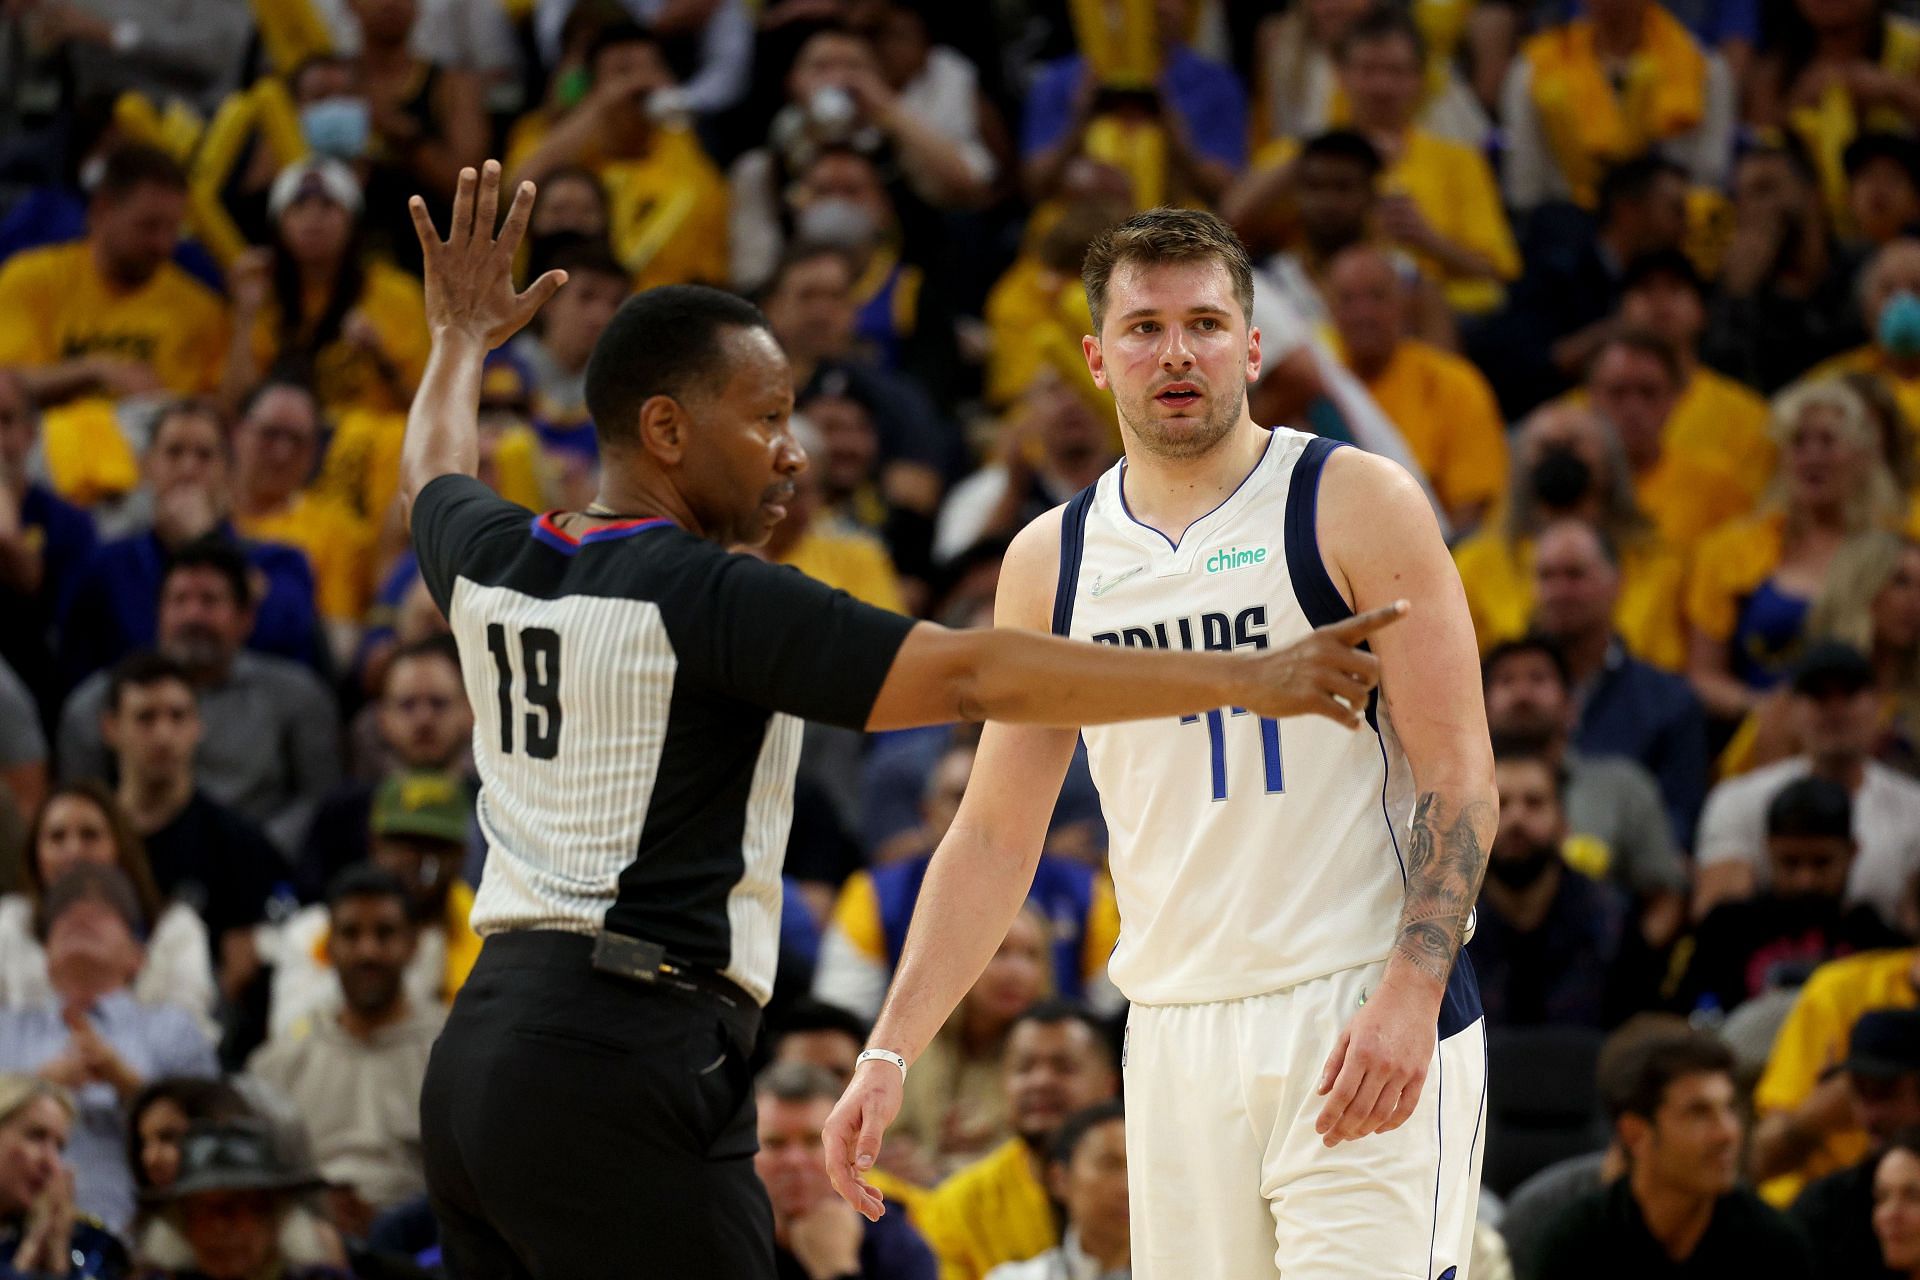 Luka Doncic of the Dallas Mavericks looks on against the Golden State Warriors during the third quarter in Game 1 of the Western Conference finals at Chase Center on Wednesday in San Francisco, California.